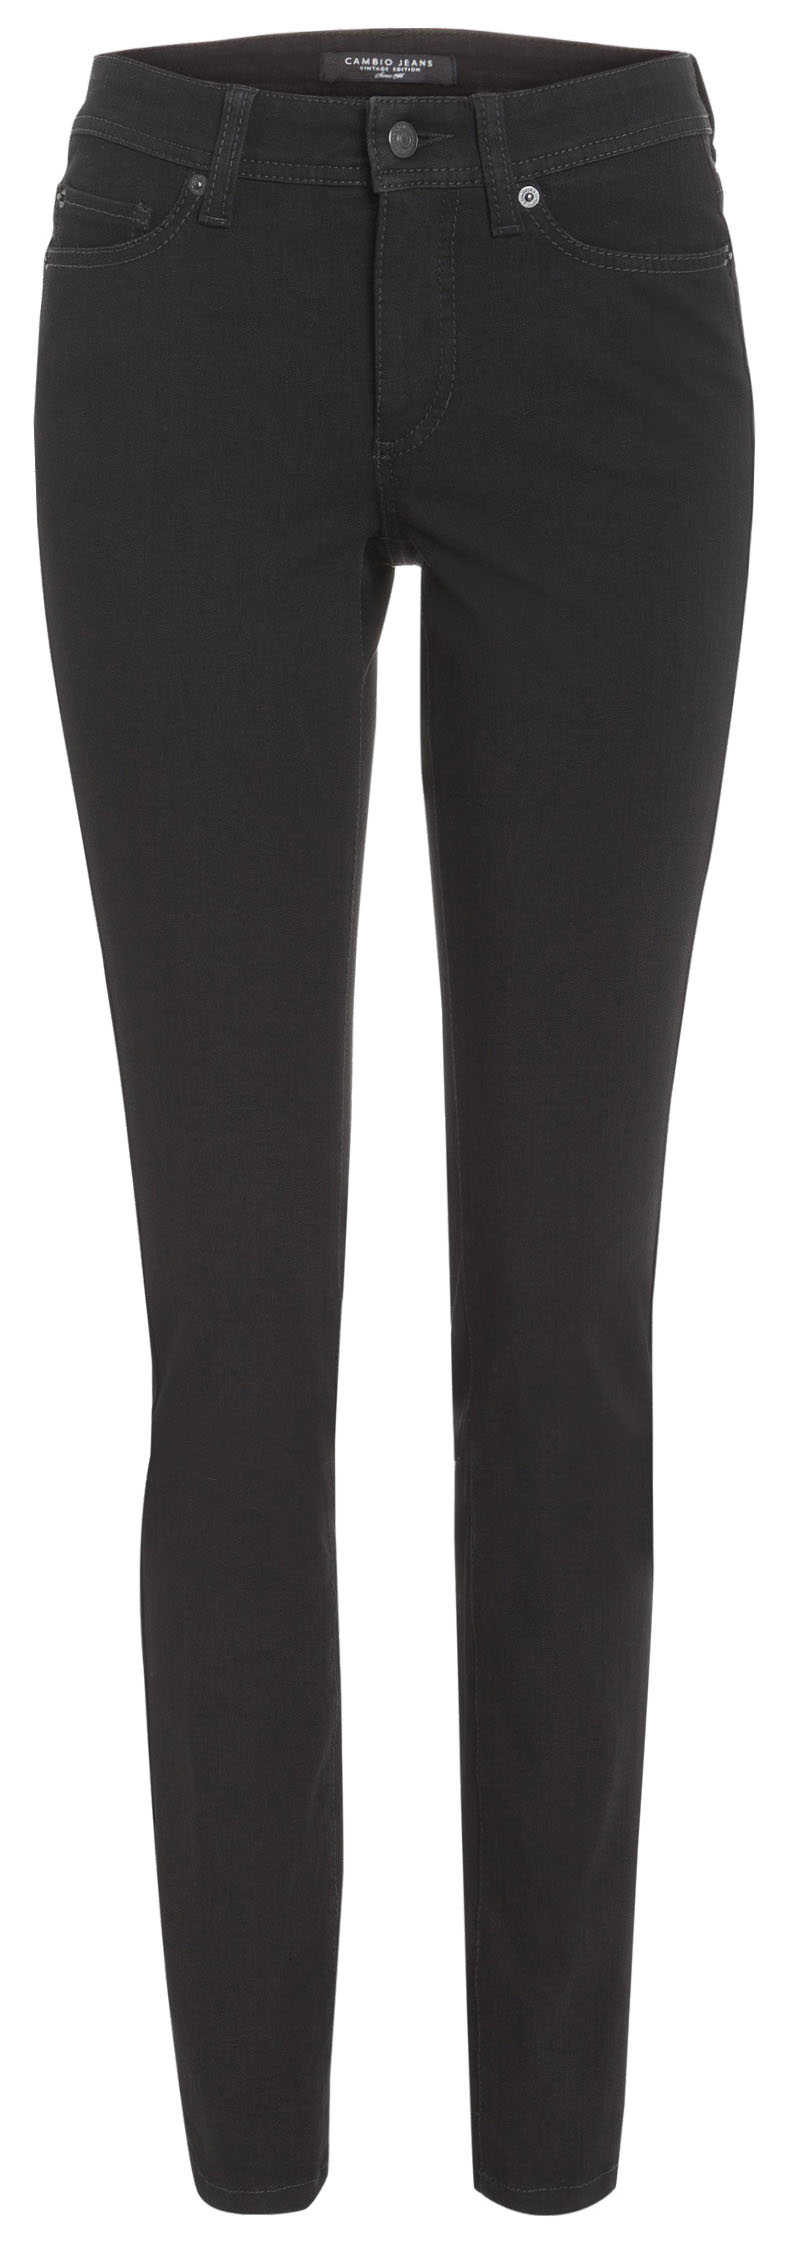 Cambio trousers PARLA 9223-0041-27 Black by Penninkhoffashion.com